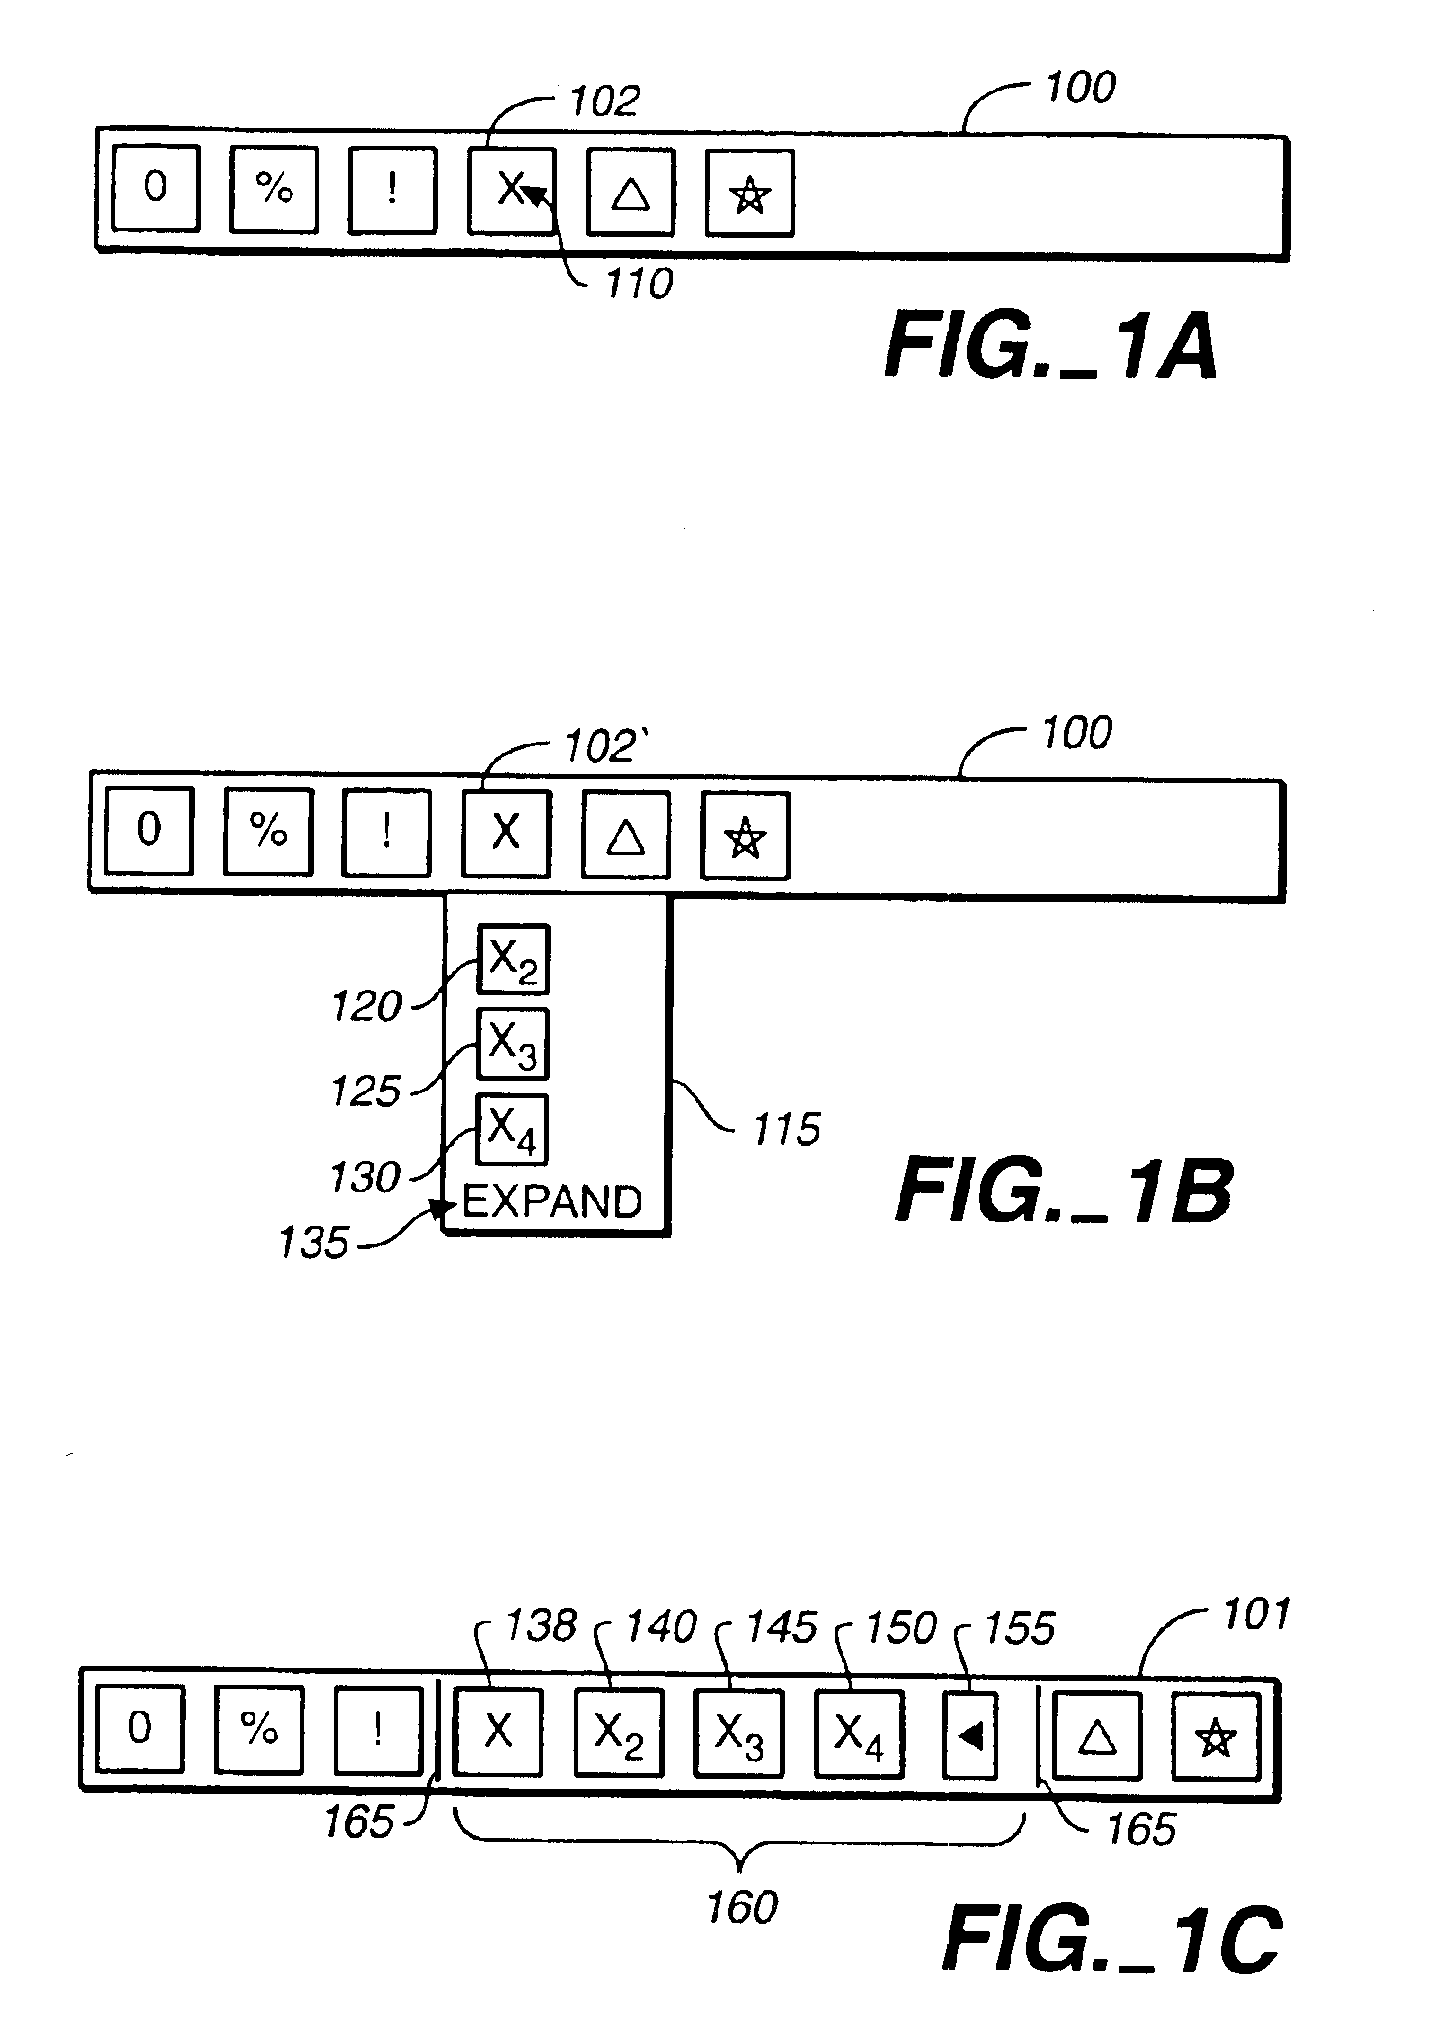 Method and apparatus for expanding and contracting graphical function displays